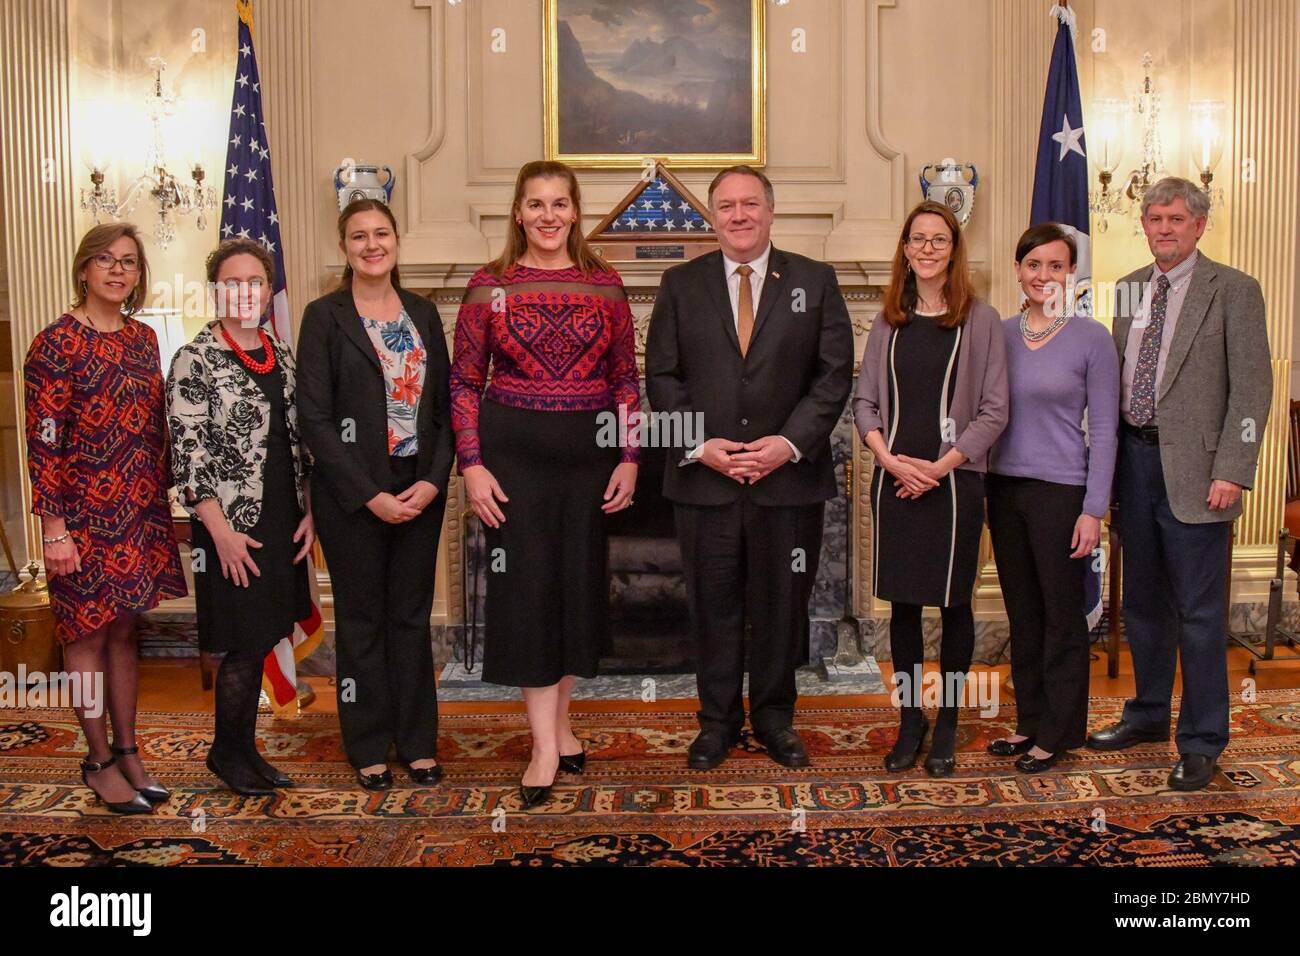 Secretary Pompeo Meets With the 2018 Winners of the the American Foreign Service Worldwide Secretary of State Award for Outstanding Volunteerism Abroad Secretary of State Miachael R. Pompeo meets with the 2018 winners of the Associates of the American Foreign Service Worldwide (AAFSW) Secretary of State Award for Outstanding Volunteerism Abroad Stock Photo